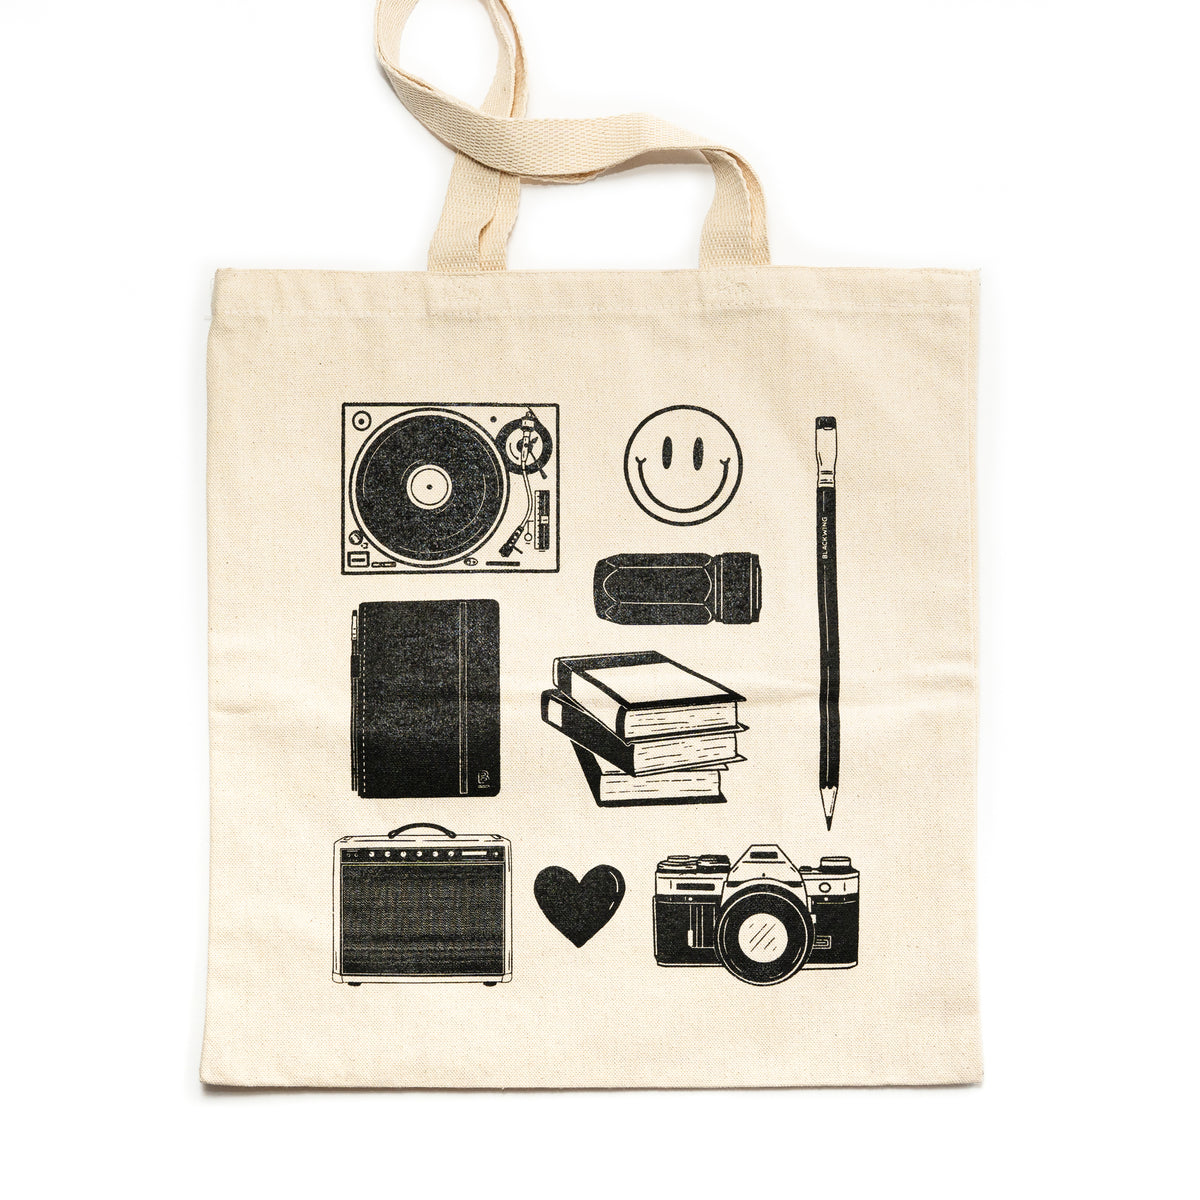 A Blackwing Doodle Tote with Blackwing pencil images on it.